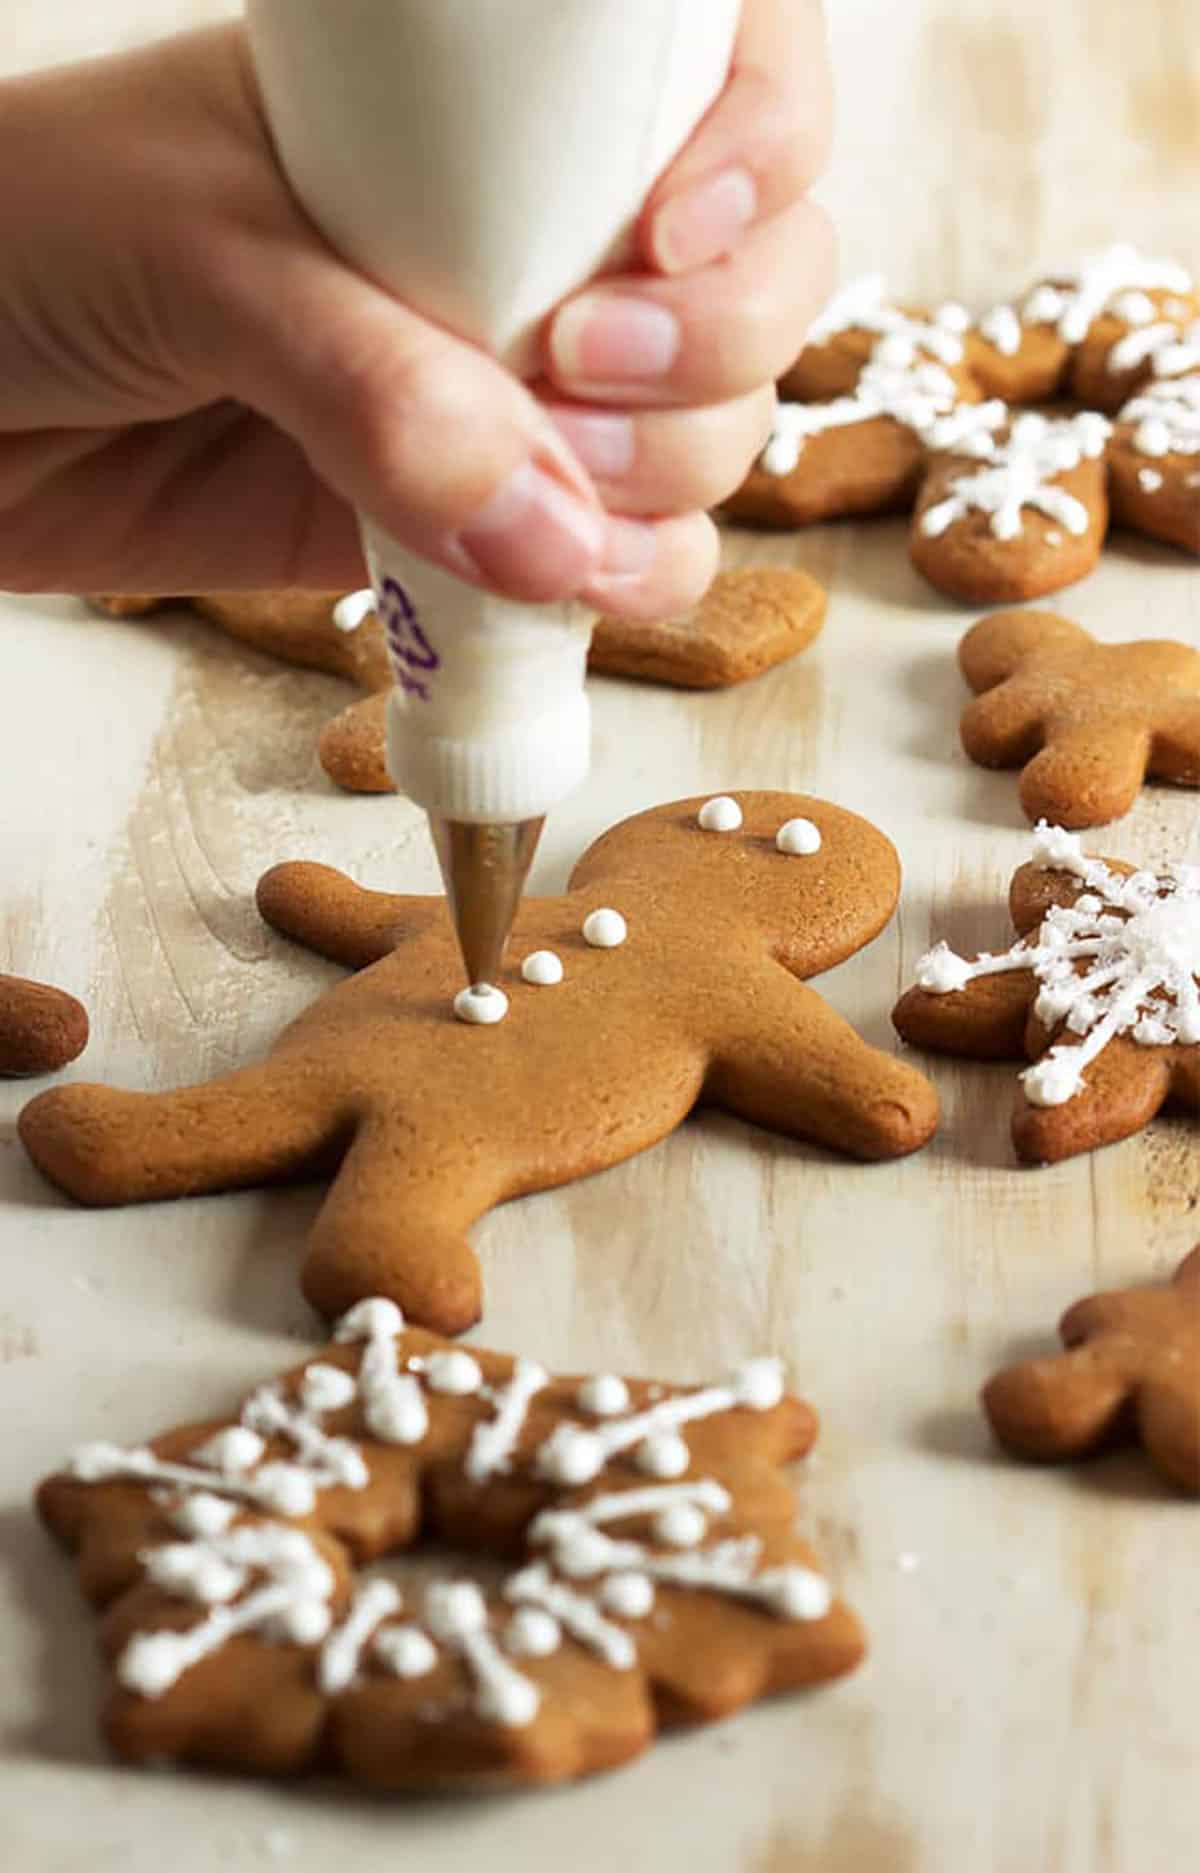 Royal Icing being piped onto a gingerbread man cookie